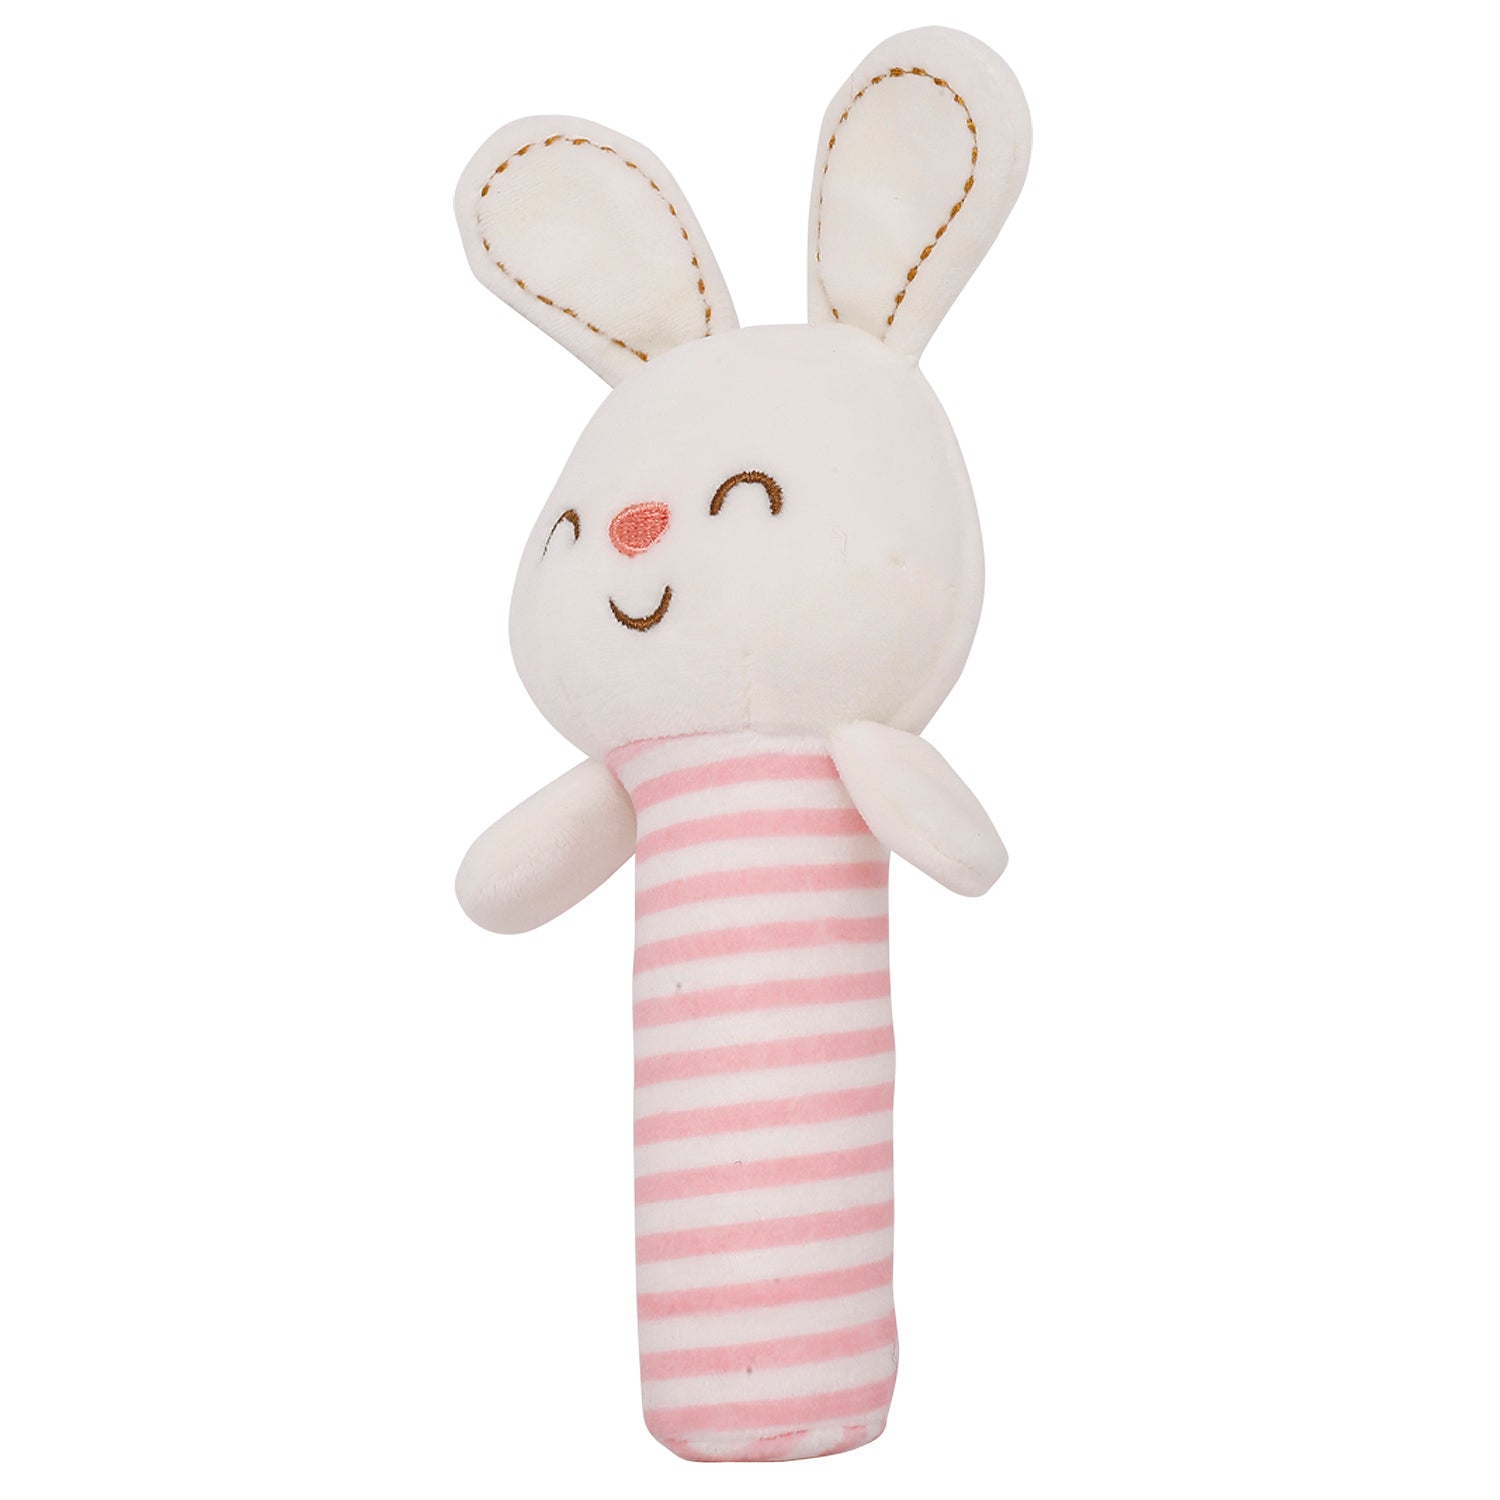 Blushing Bunny White And Pink Handheld Rattle Toy - Baby Moo